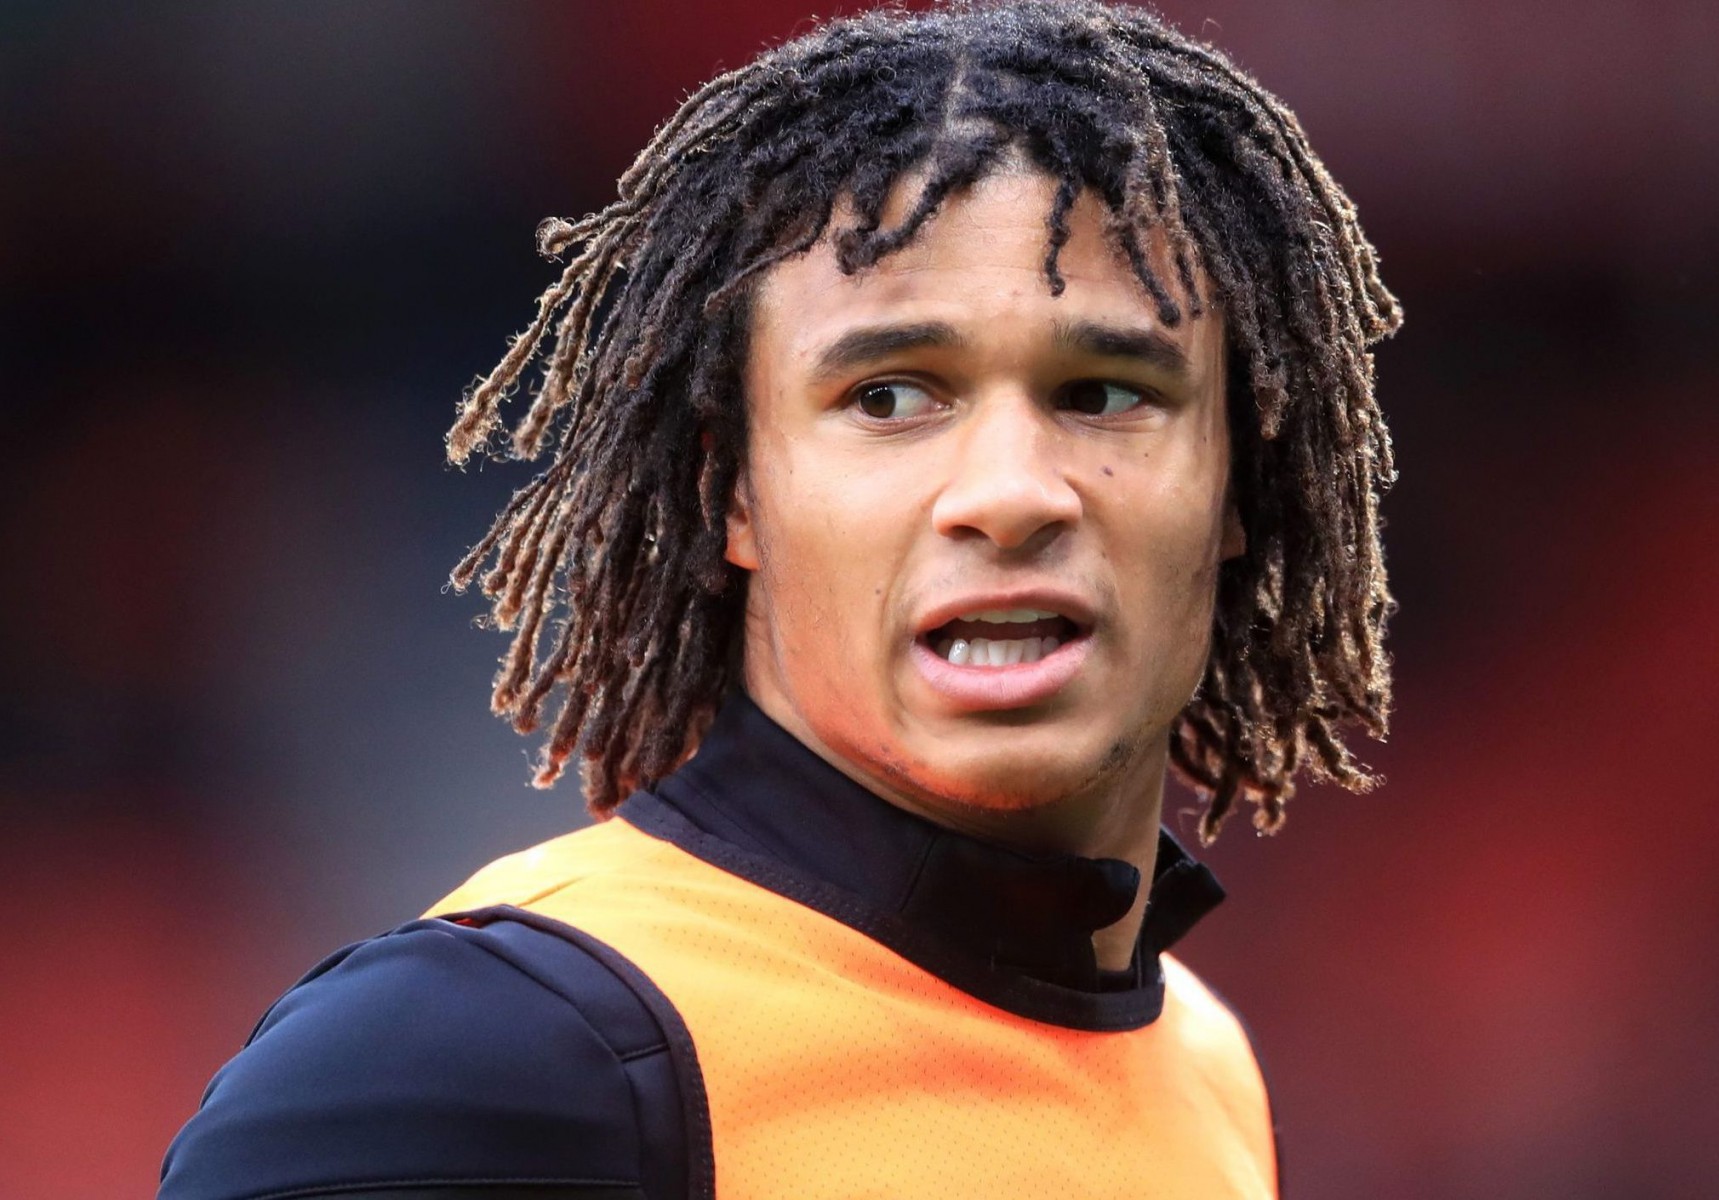 Nathan Ake has already been linked with Chelsea, Man City, Spurs and Everton